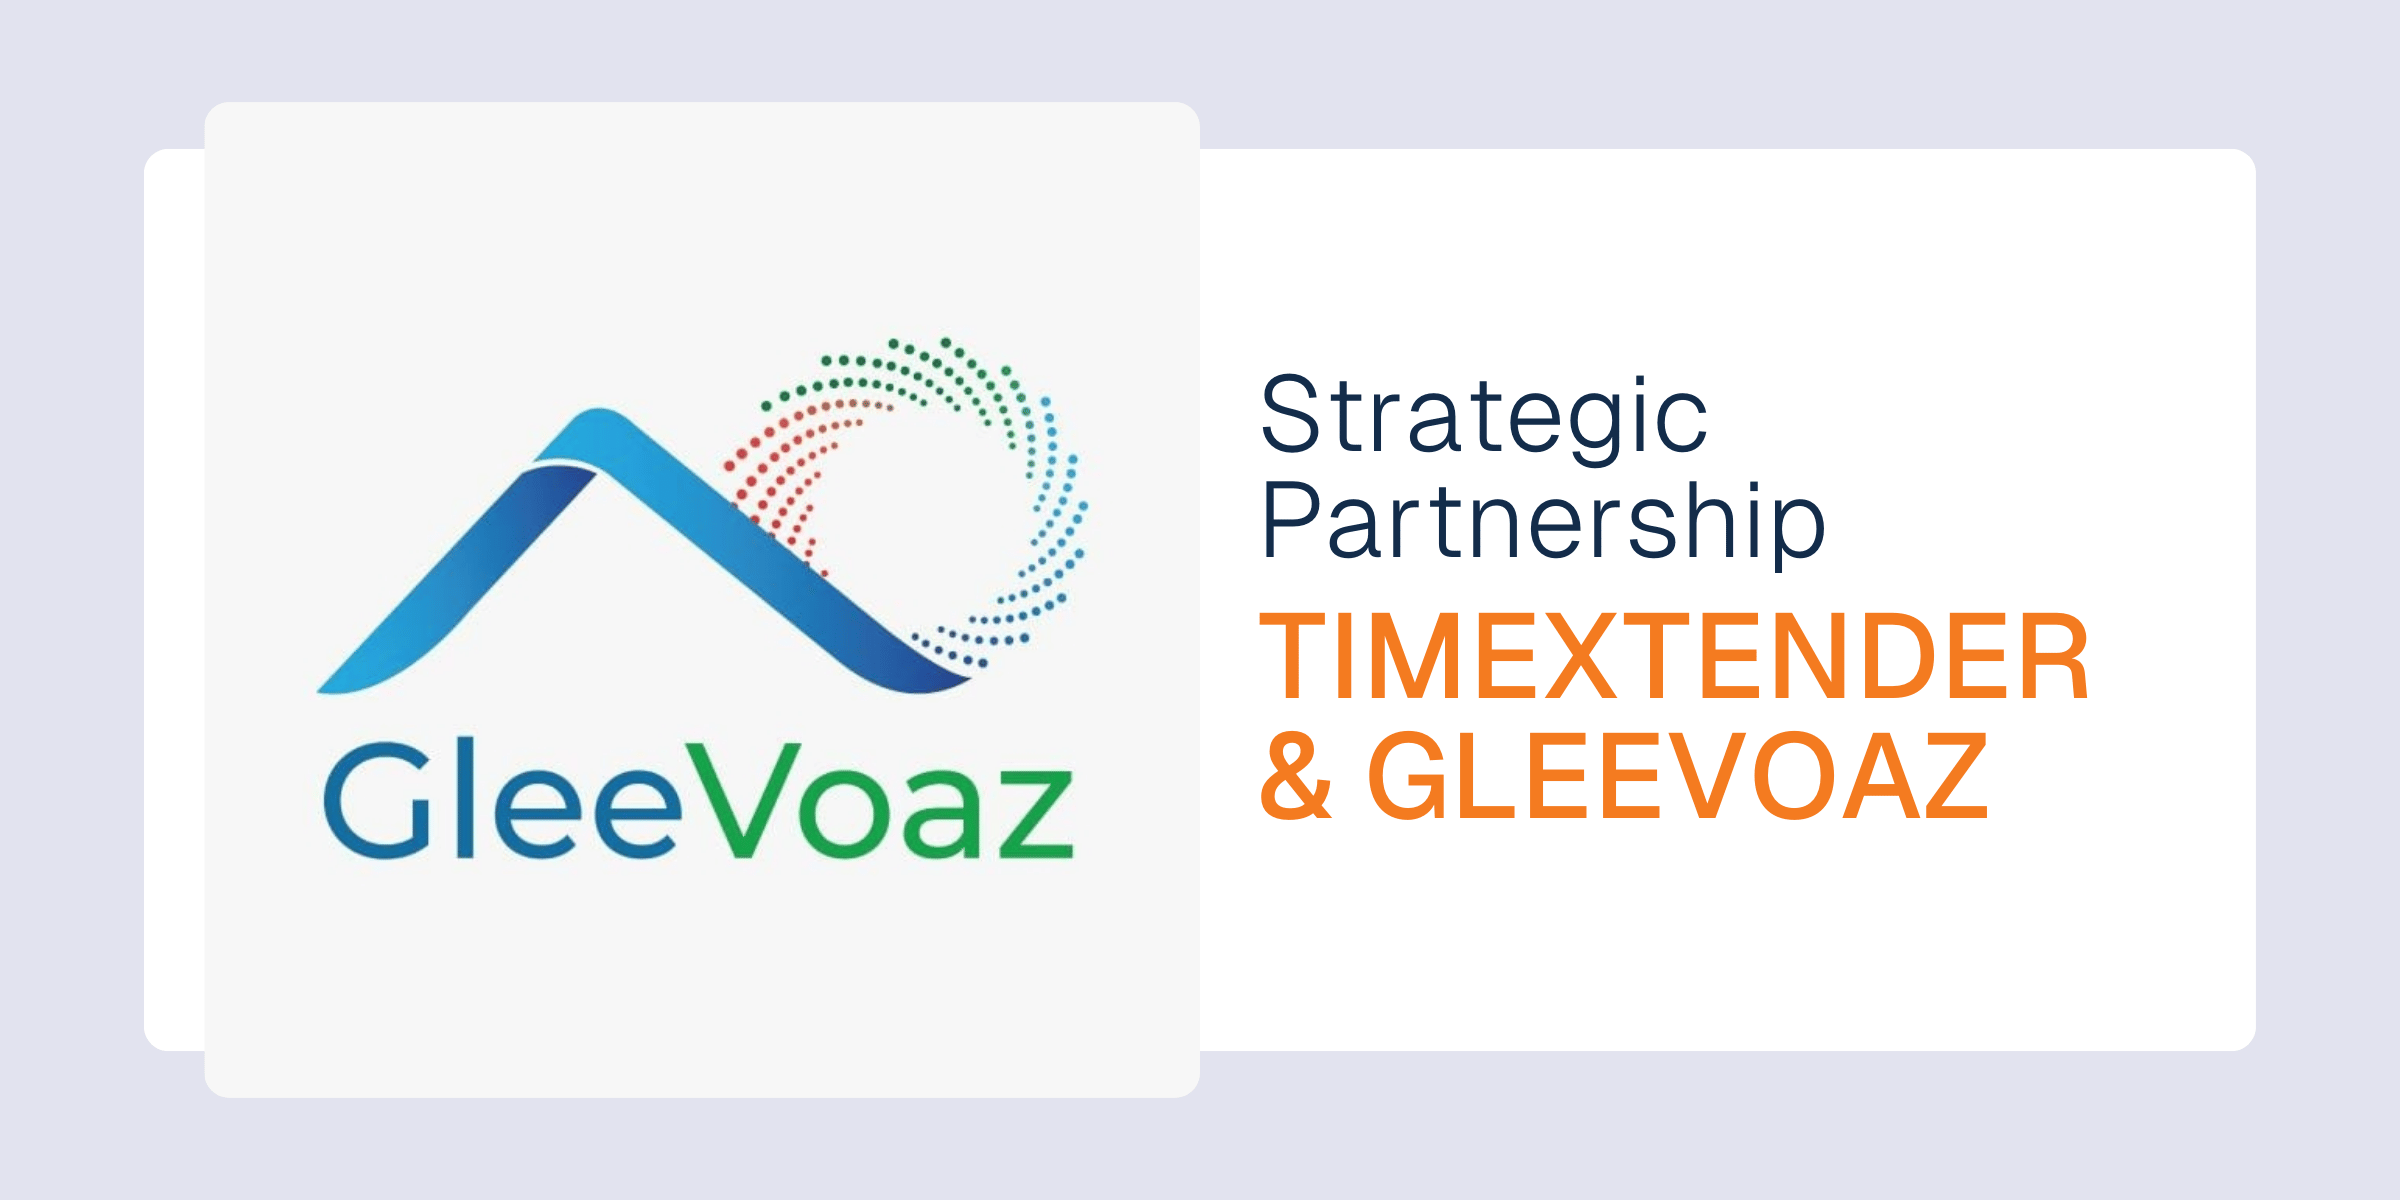 TimeXtender Welcomes GleeVoaz as a new Partner in Southeast Asia